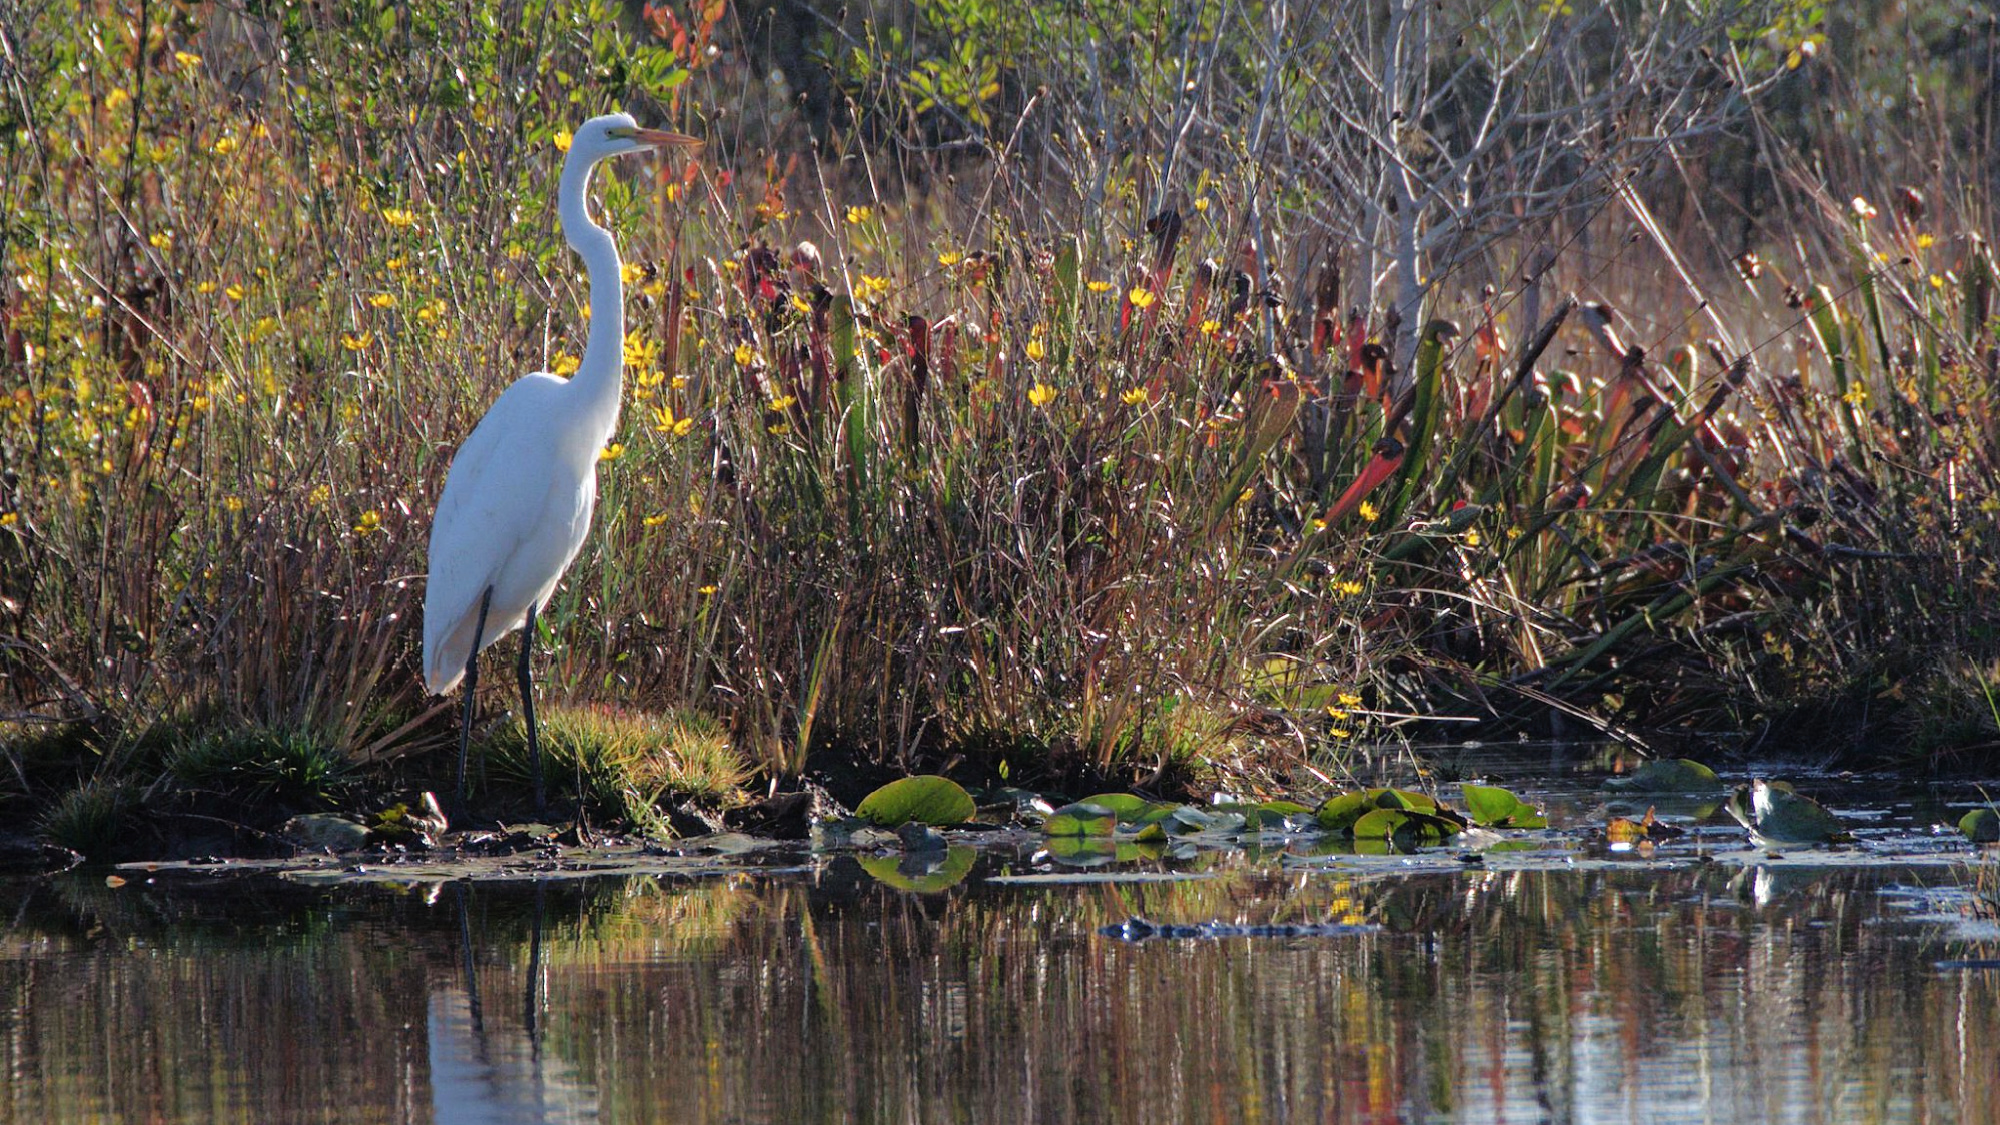 An egret rests next to a swamp in Okefenokee National Wildlife Refuge